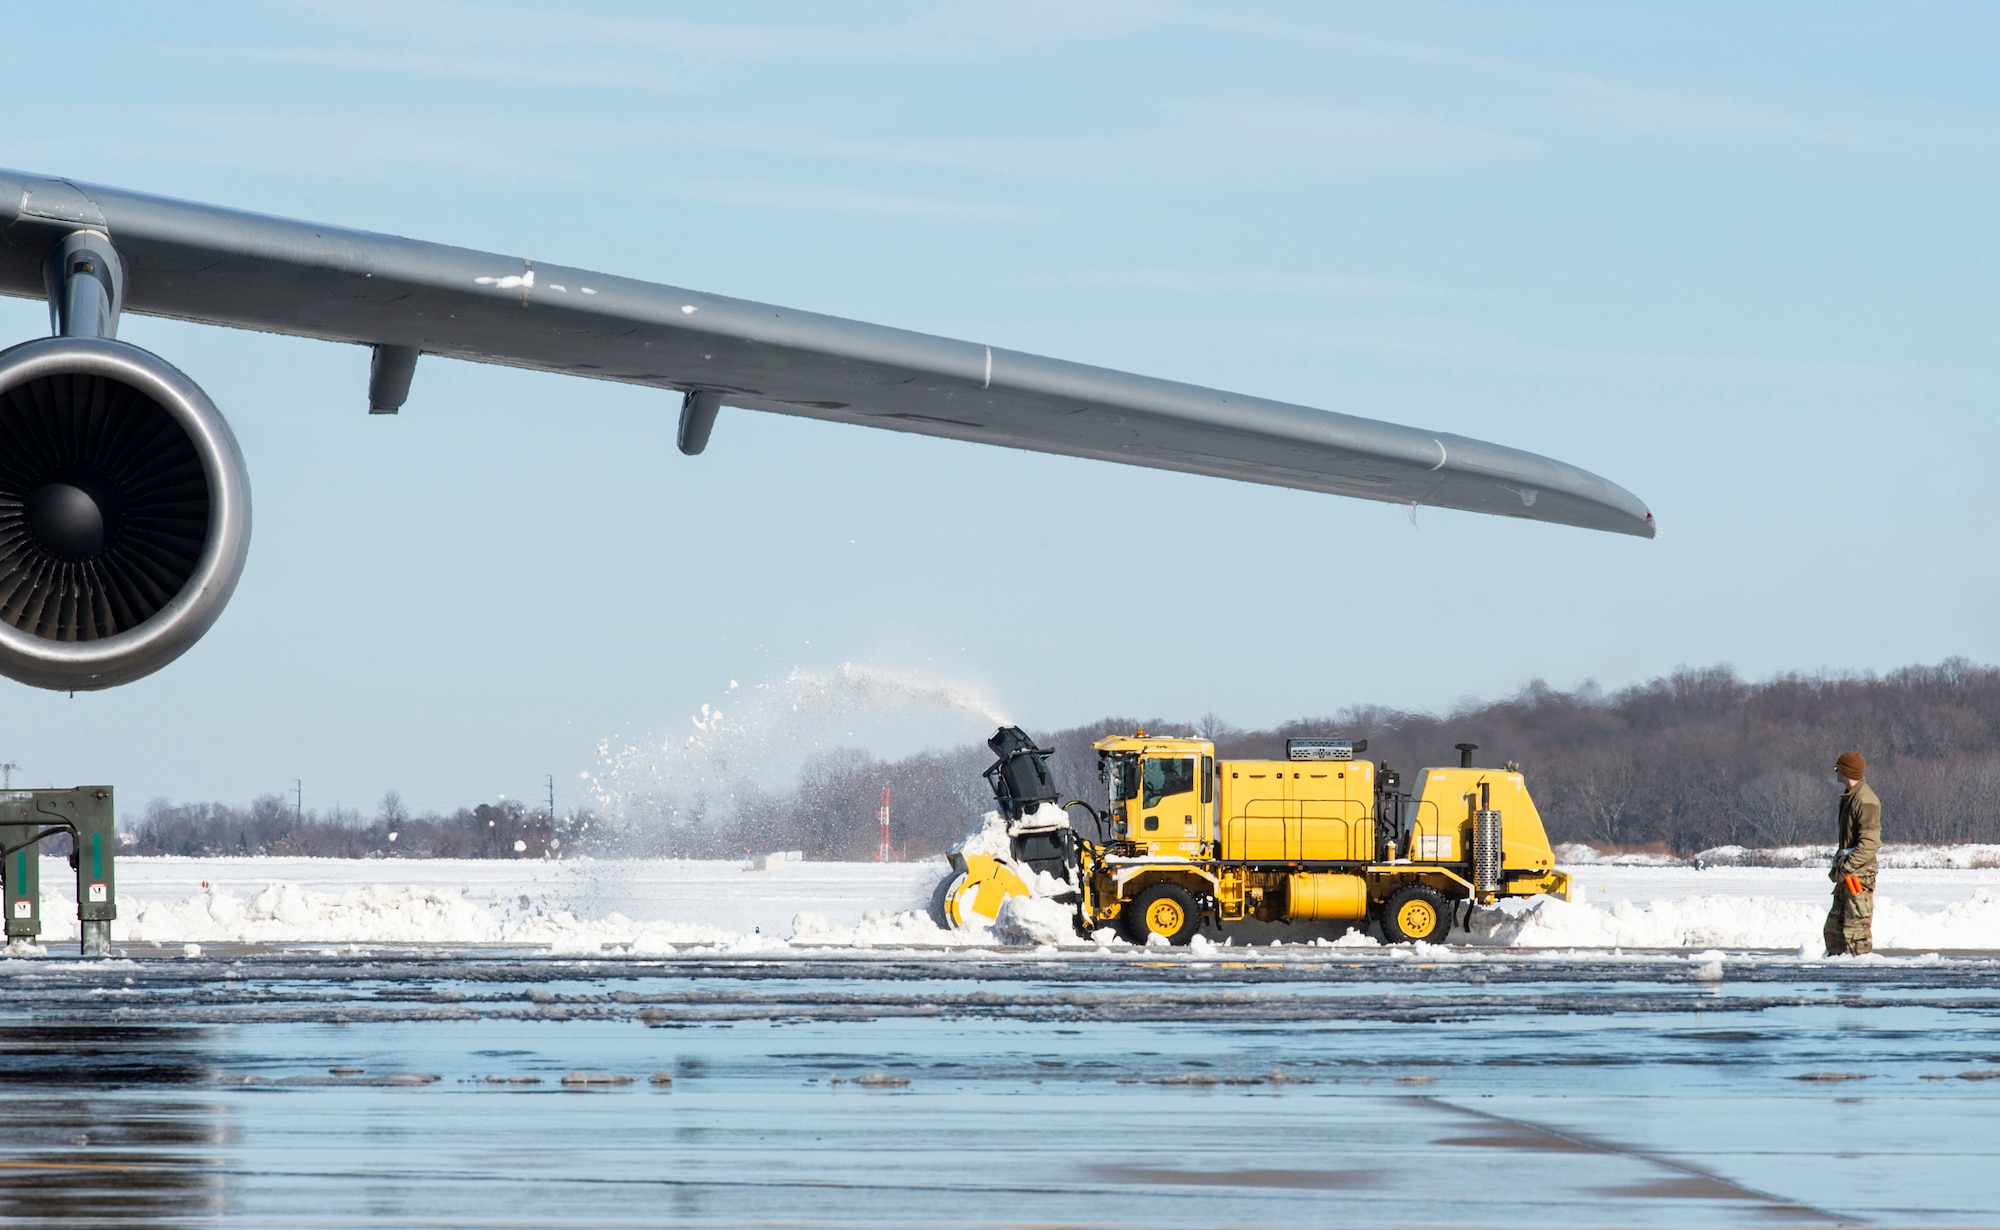 A 436th Civil Engineer Squadron member clears snow off a taxiway at Dover Air Force Base, Delaware, Jan. 4, 2022. Snow removal crews worked around the clock to remove eight inches of snow and ice from Winter Storm Frida that accumulated on the two runways and numerous taxiways. (U.S. Air Force photo by Roland Balik)